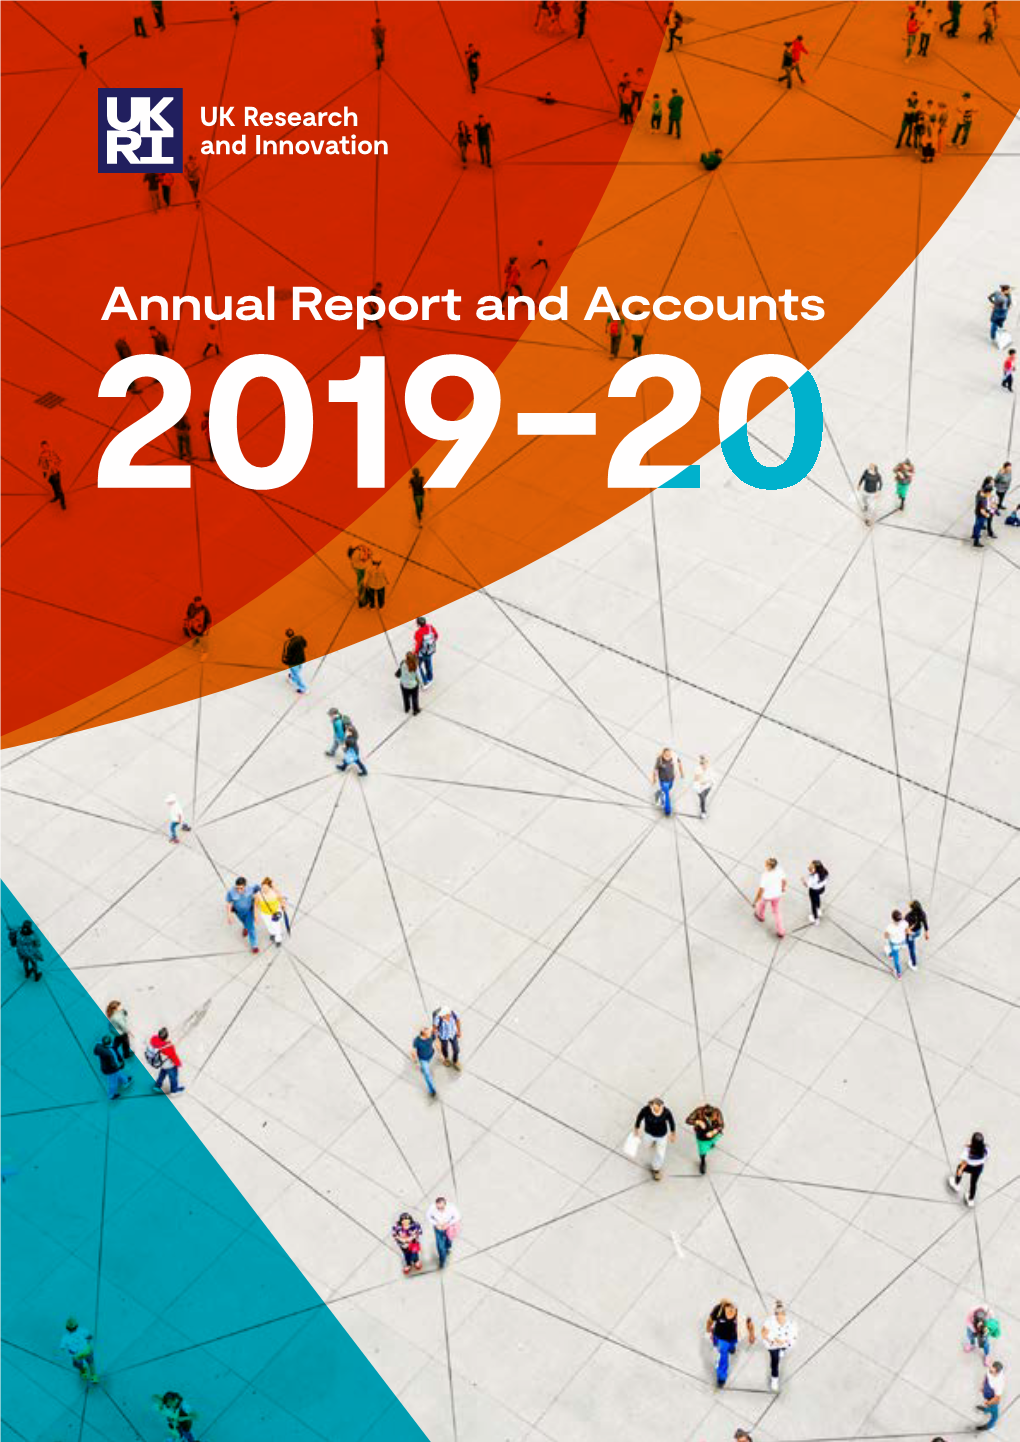 (UKRI) Annual Reports and Accounts for 2019-20